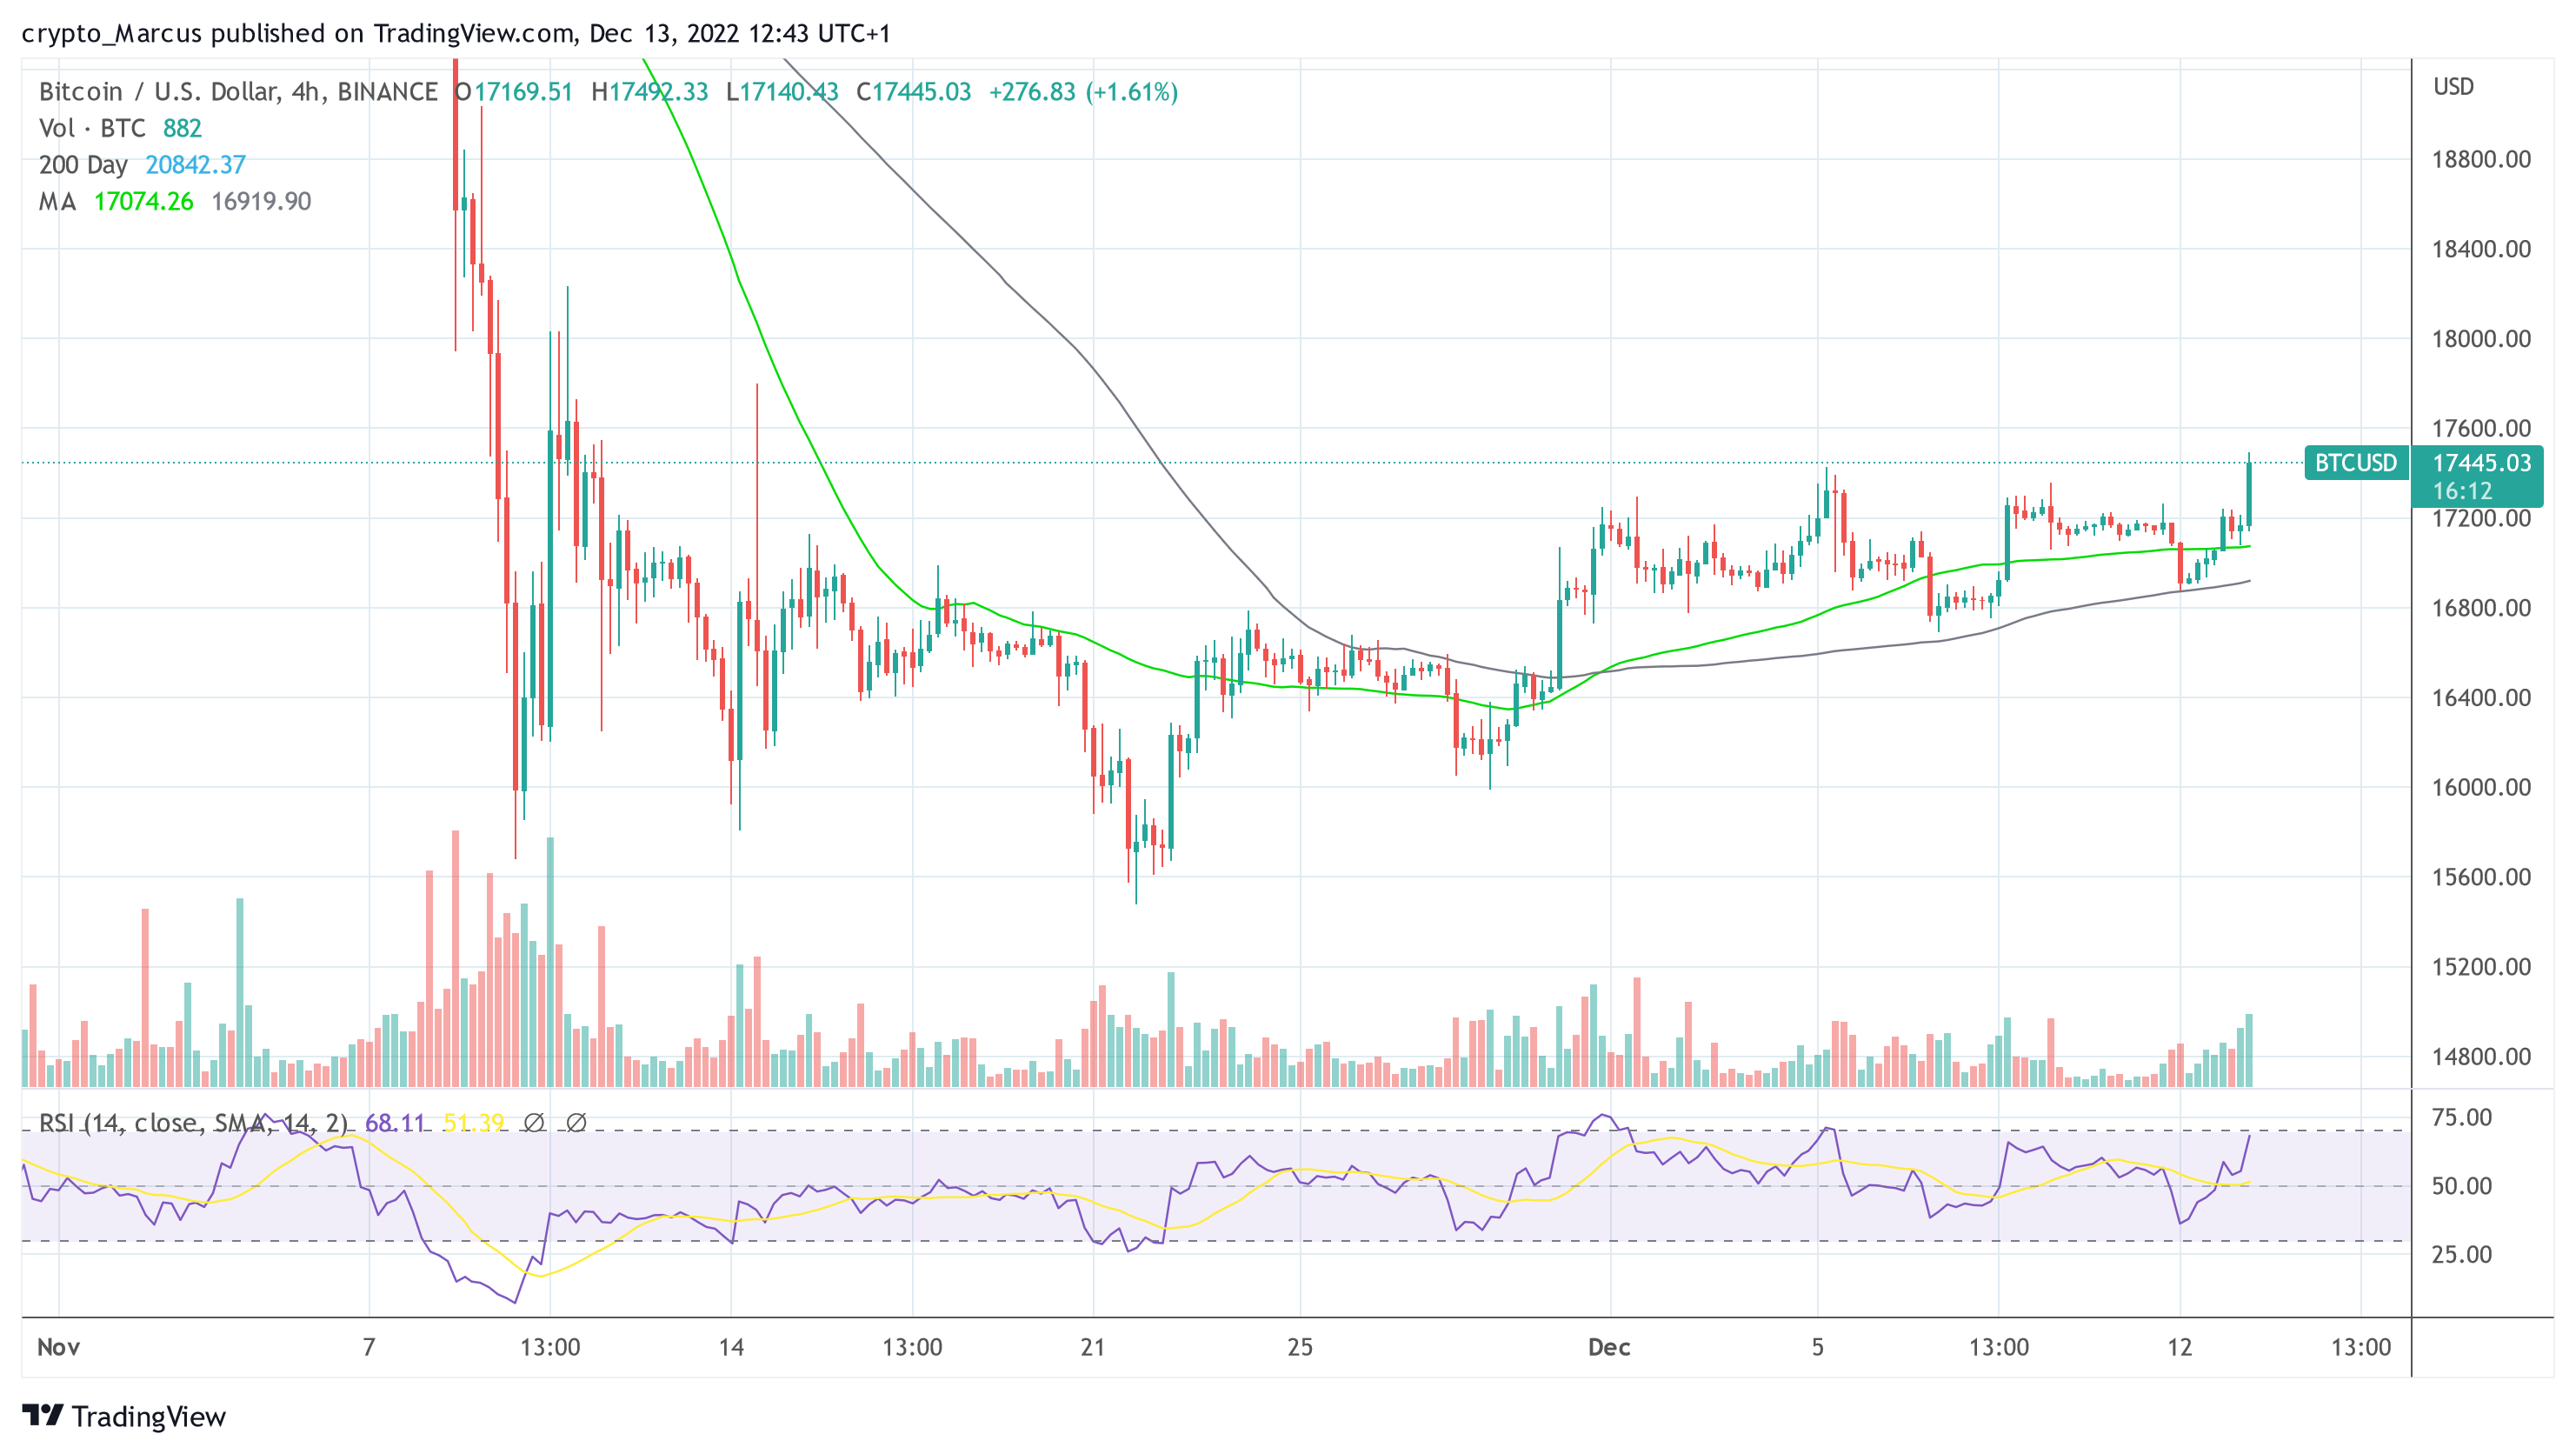 BTC price ahead of CPI release and Bankman-Fried / FTX hearing